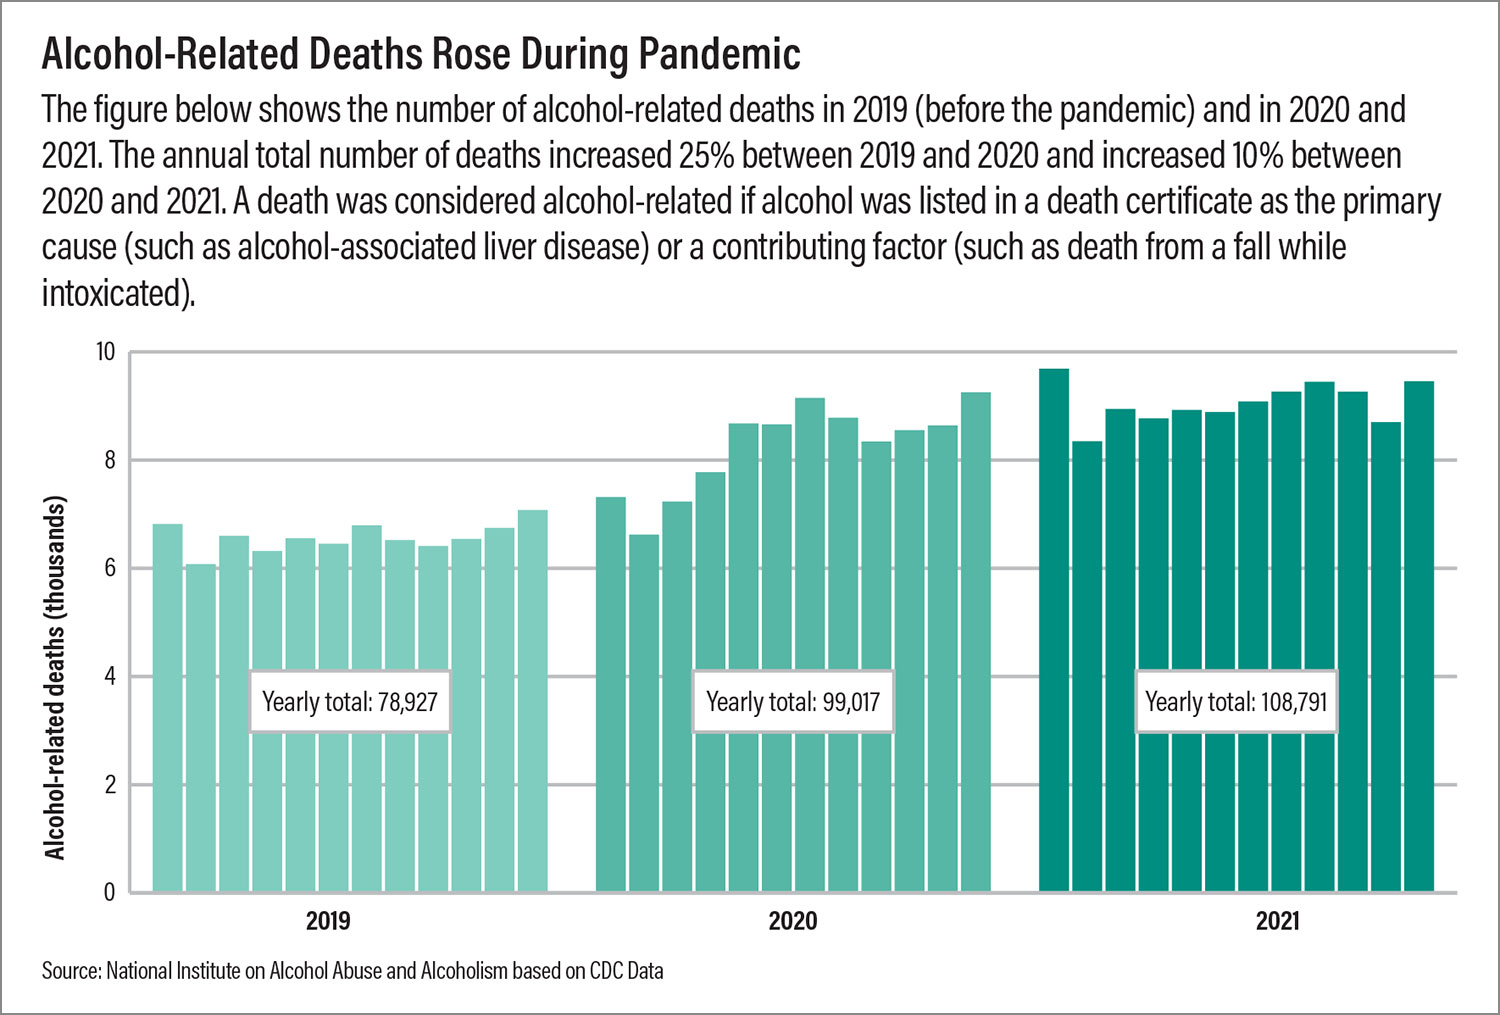 The figure shows the number of alcohol-related deaths in 2019 (before the pandemic) and in 2020 and 2021. The annual total number of deaths increased 25% between 2019 and 2020 and increased 10% between 2020 and 2021. A death was considered alcohol-related if alcohol was listed in a death certificate as the primary cause (such as alcohol-associated liver disease) or a contributing factor (such as death from a fall while intoxicated).